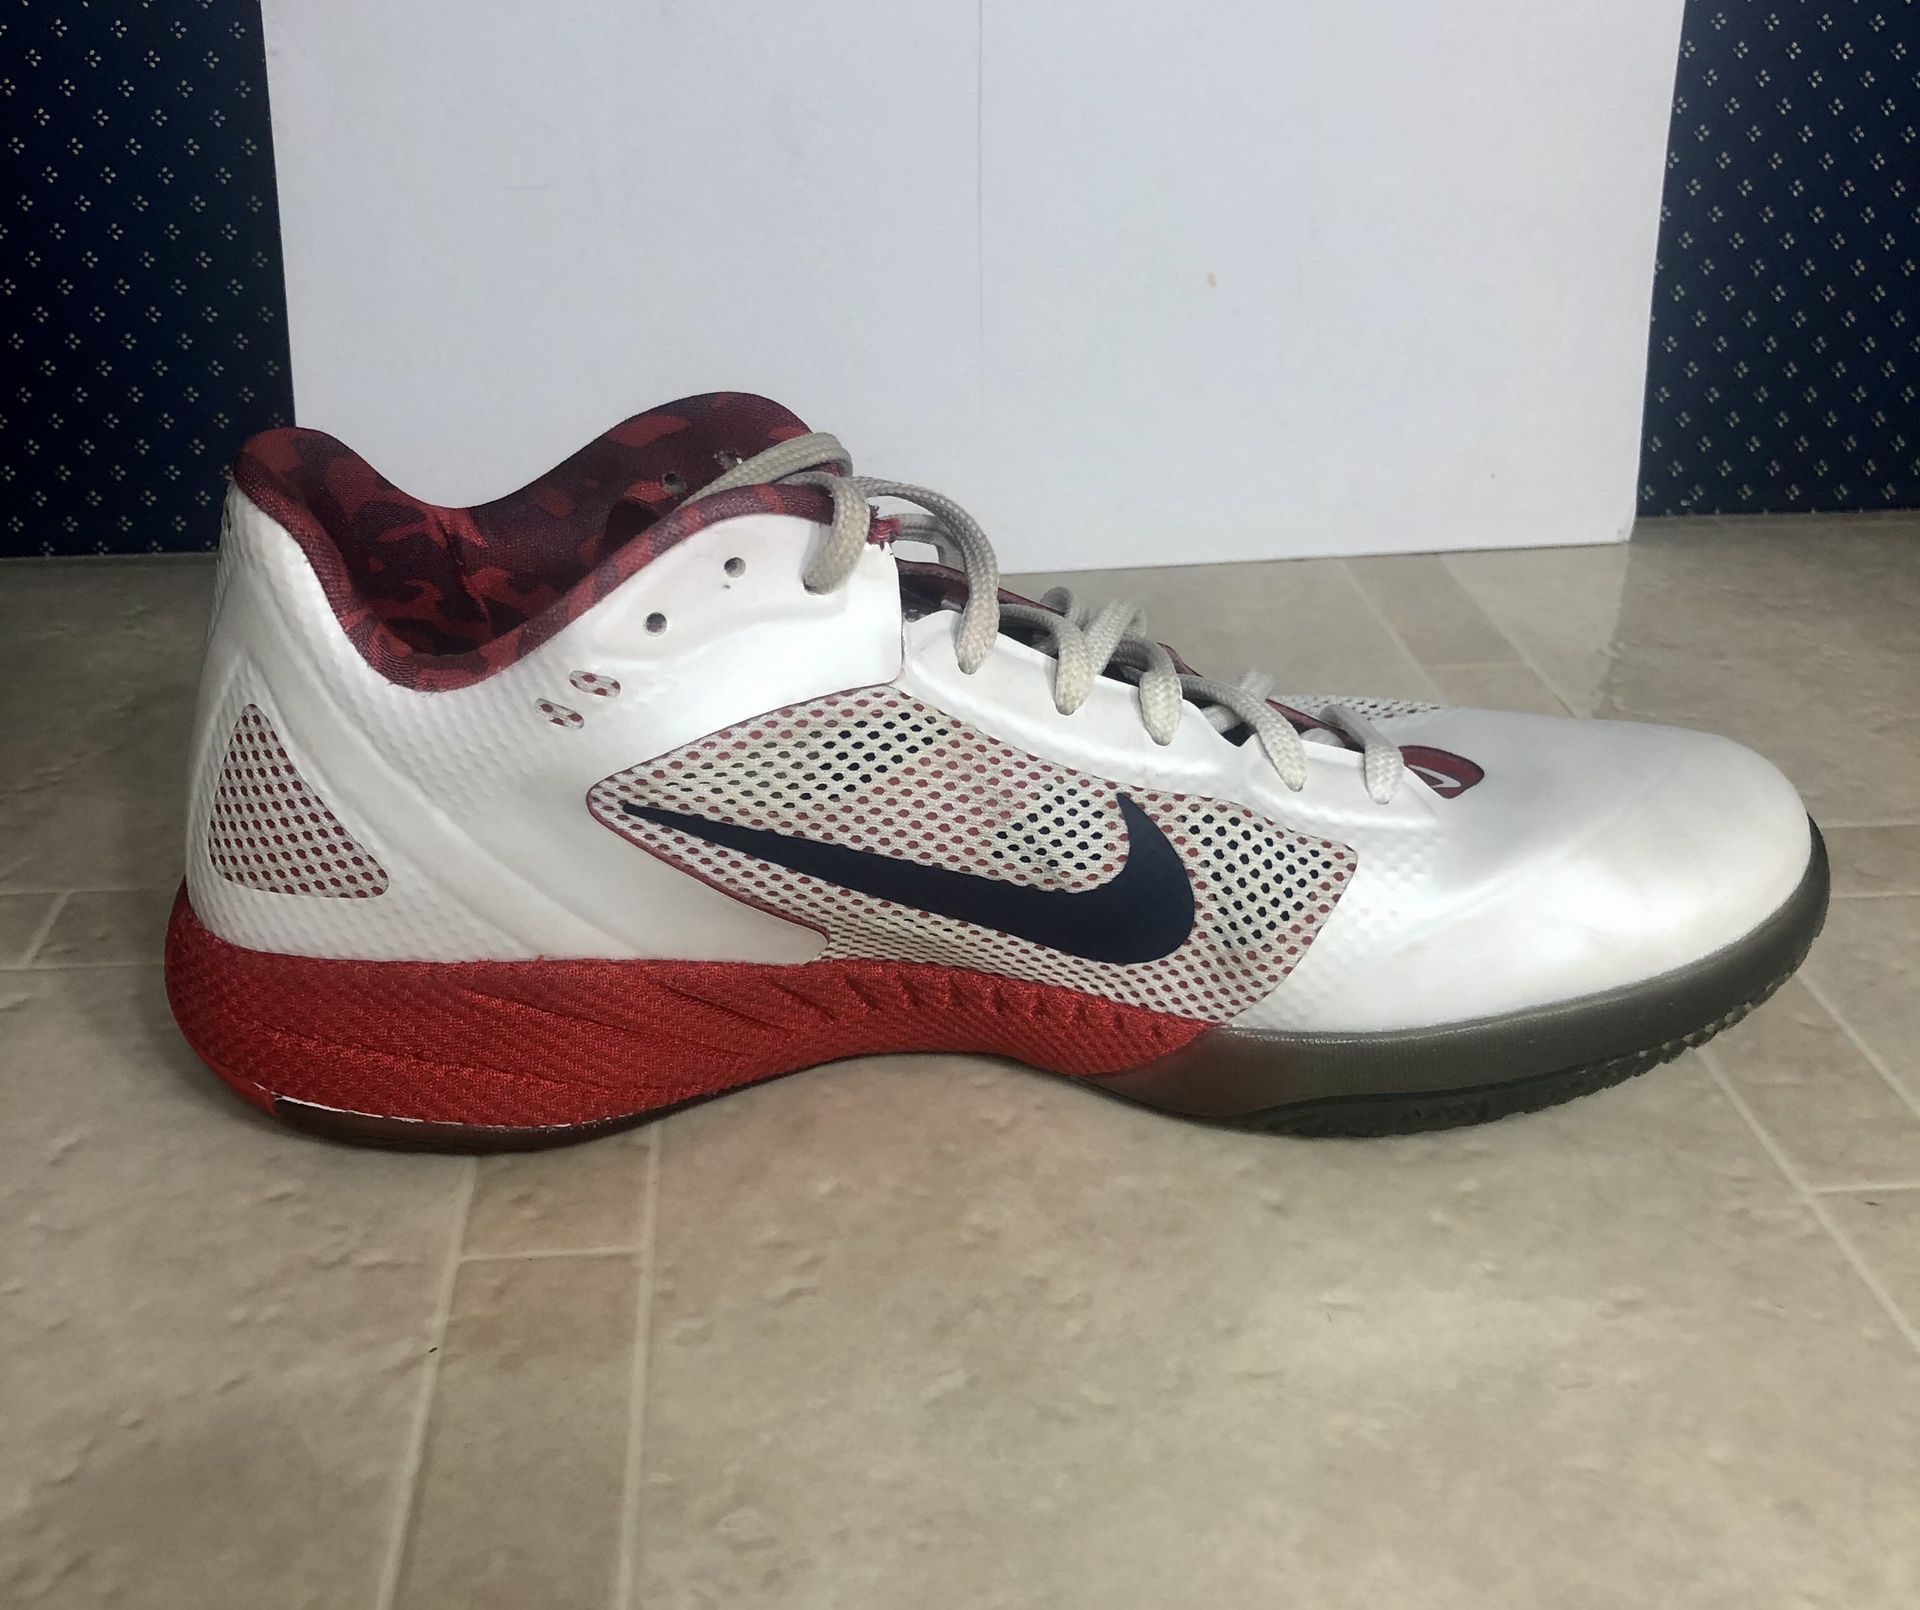 Nike hyperfuse low Deron Williams PE sz 11 for Sale in IN - OfferUp